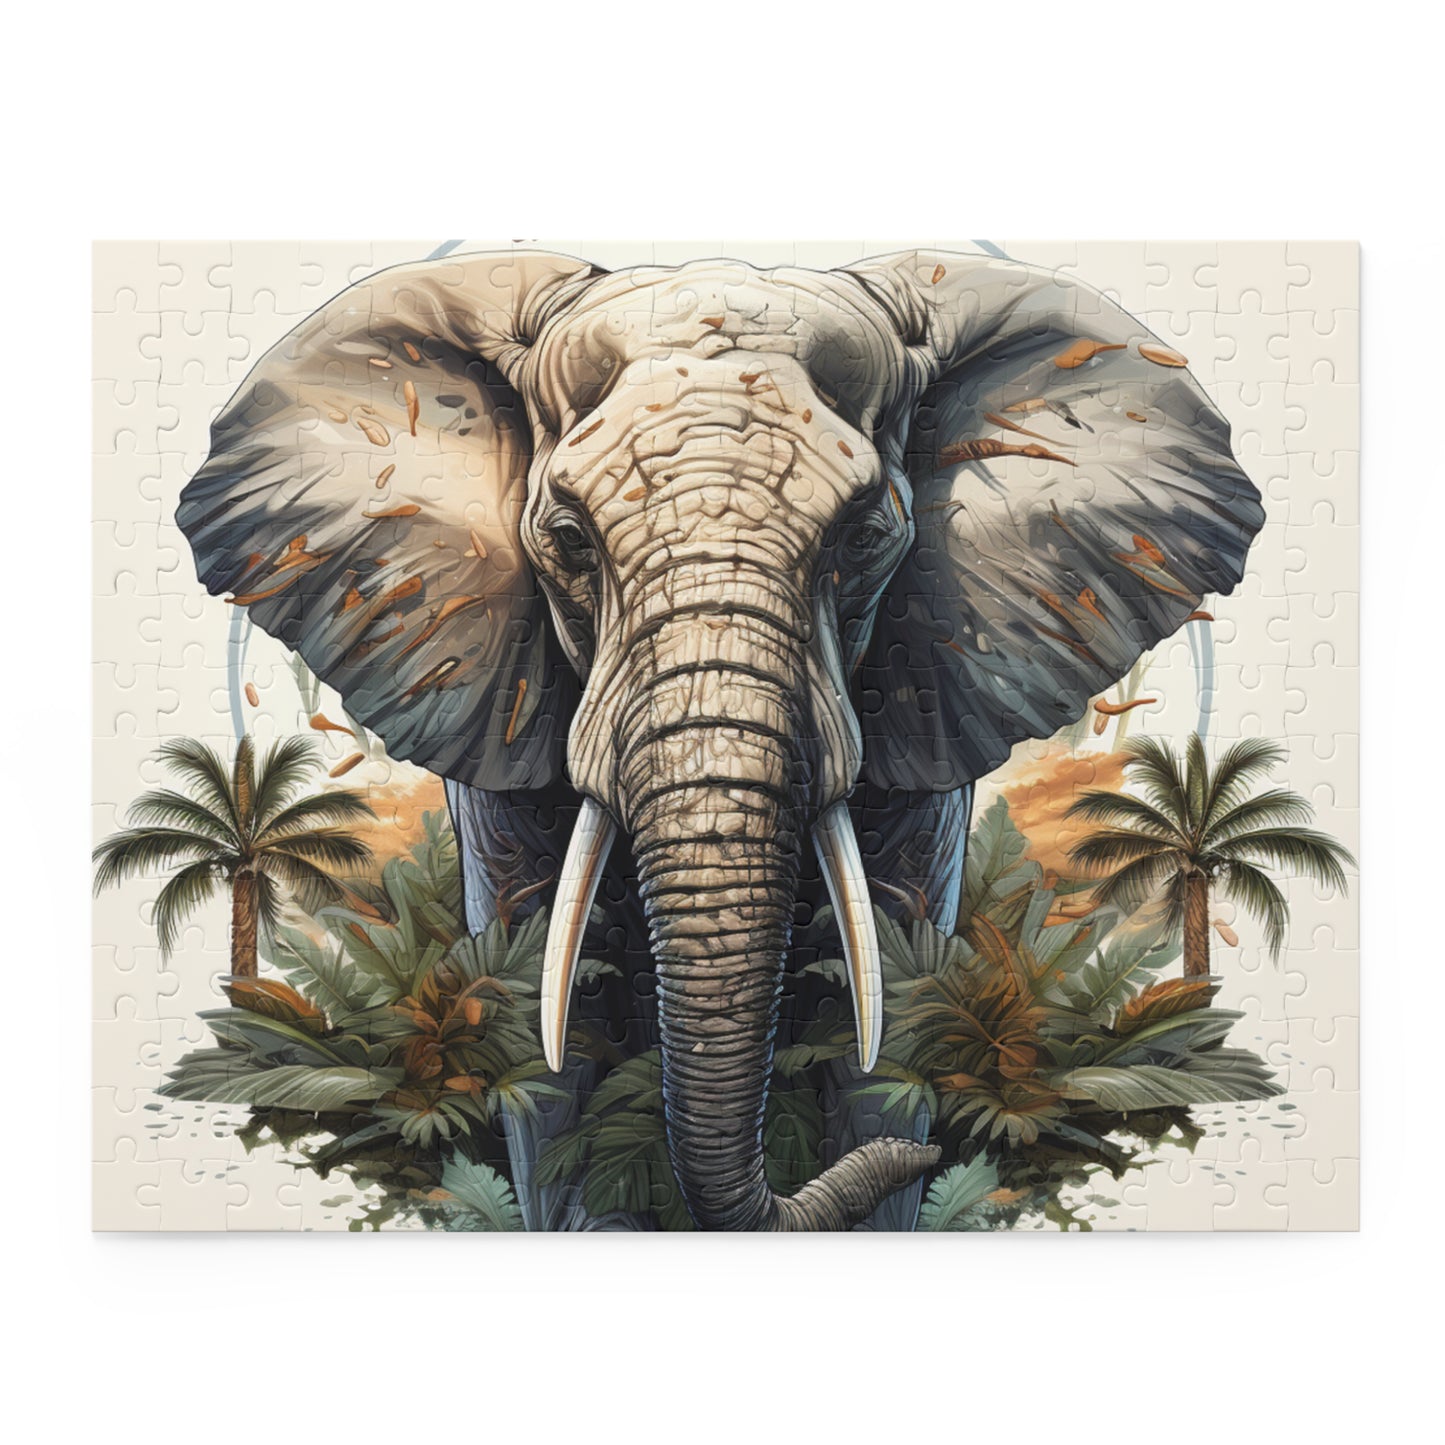 Abstract Elephant Trippy Jigsaw Puzzle for Boys, Girls, Kids Adult Birthday Business Jigsaw Puzzle Gift for Him Funny Humorous Indoor Outdoor Game Gift For Her Online-2